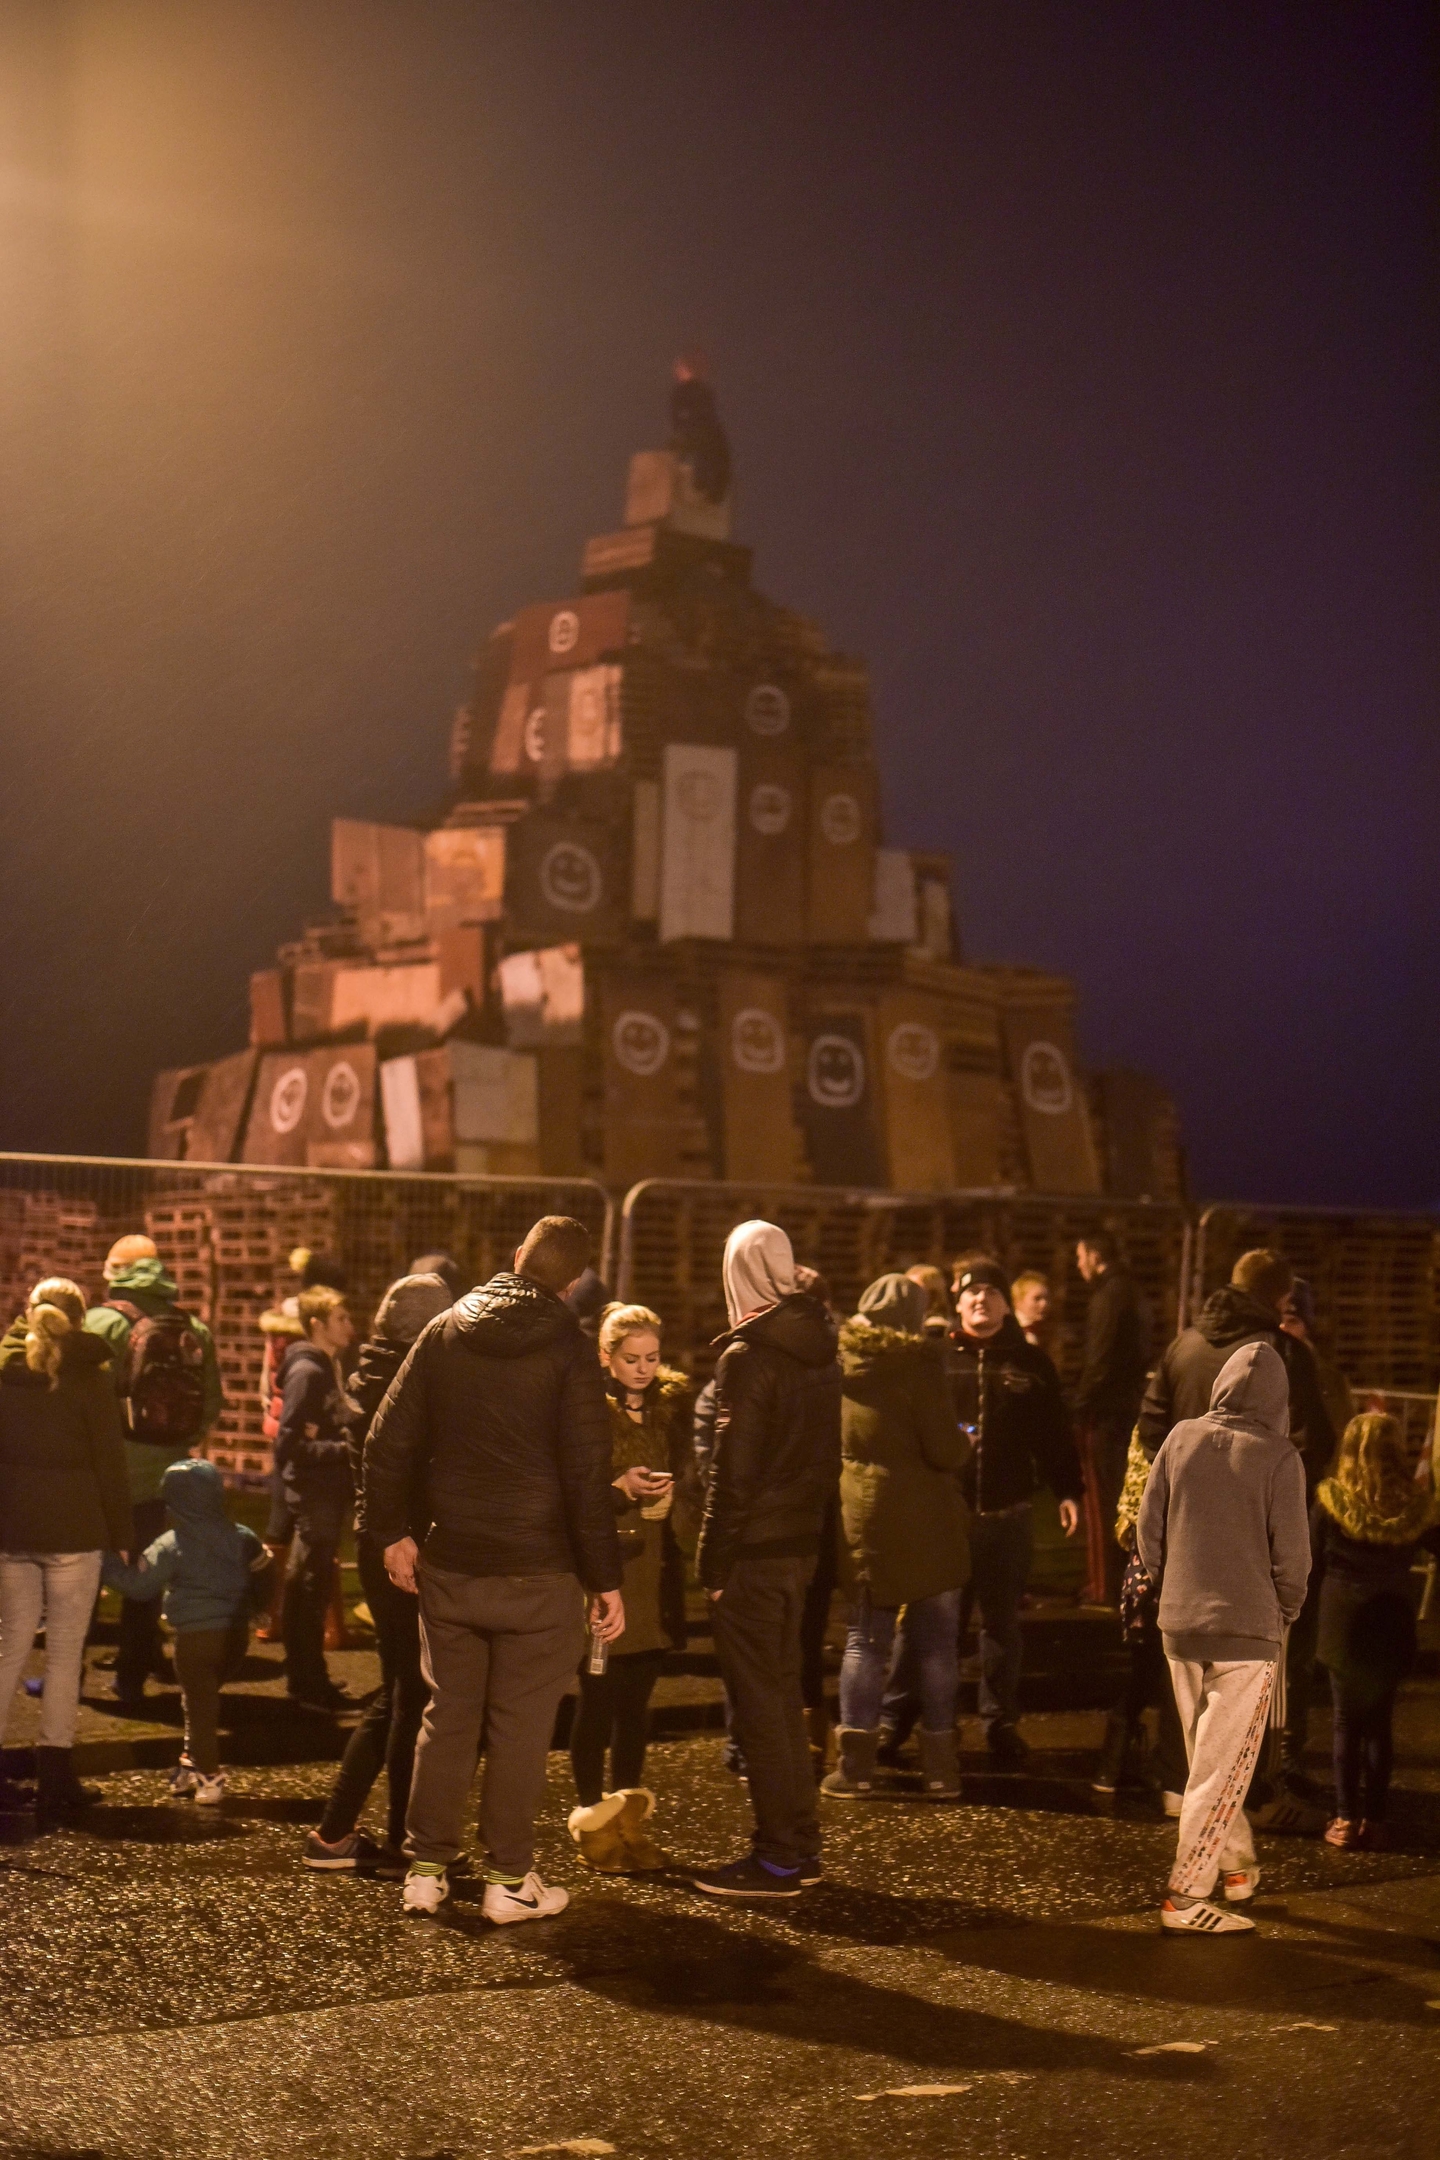 Members of the public gather in front of the bonfire in Peterhead, Aberdeenshire on November 05 2015. Events are being held across the country tonight, Thurs November 05, to mark Guy Fawkes Day. The bonfire in Peterhead, Aberdeenshire, which is created by pallets and other large wooden objects, is thought to be one of the biggest in Scotland. It's estimated to stand at over 20 feet tall.